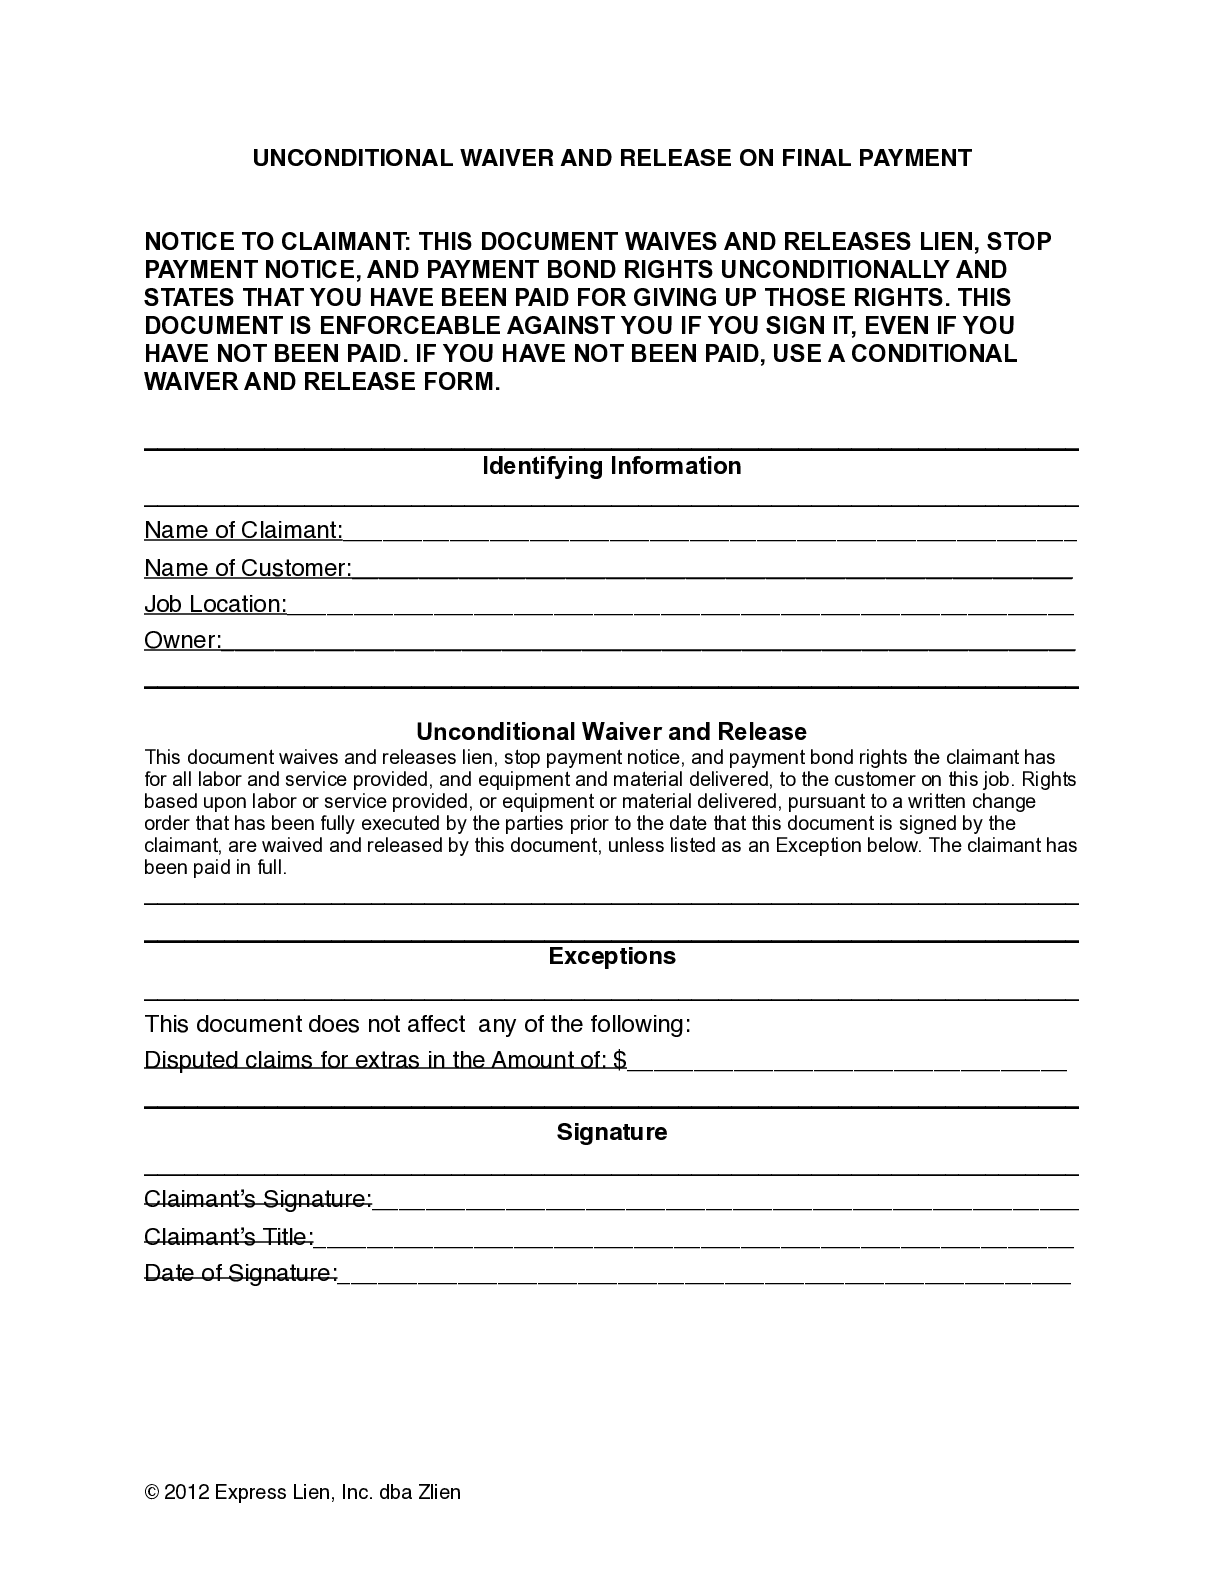 West Virginia Final Unconditional Lien Waiver Form - free from